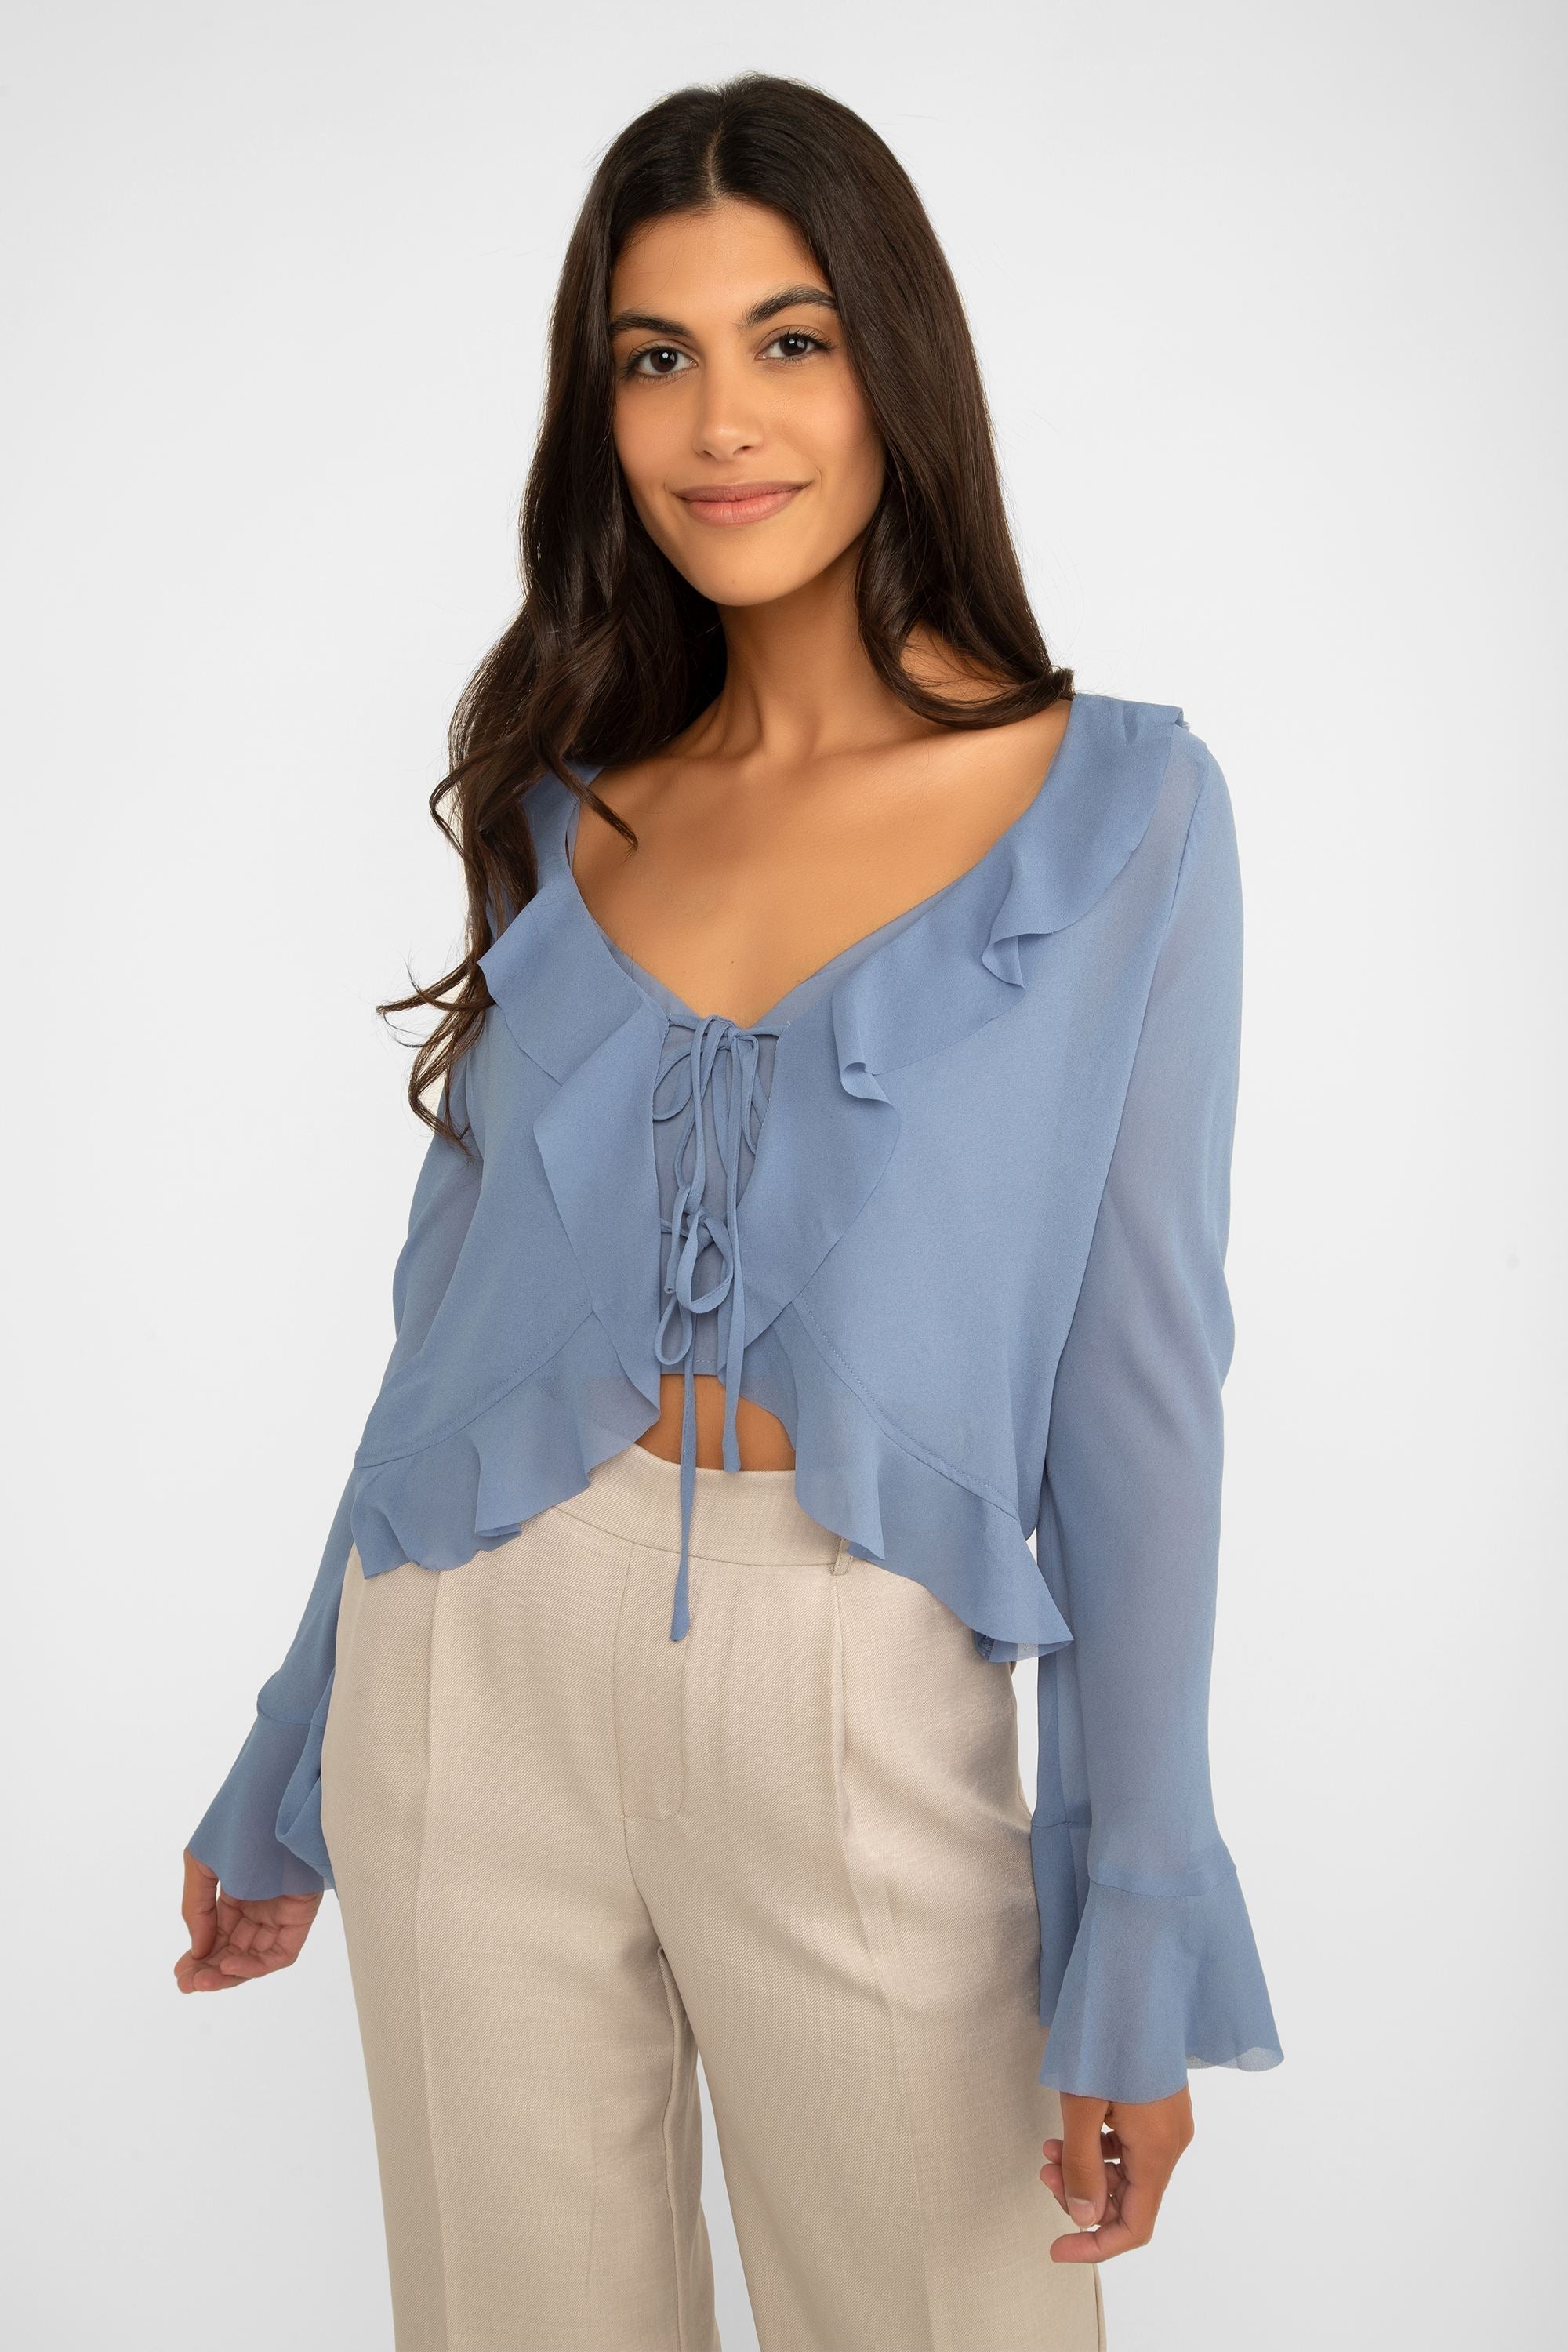 Lucy Paris (T2198) Women's Cropped Long Sleeve Ruffle Blouse in a soft blue chiffon fabric with removable tank